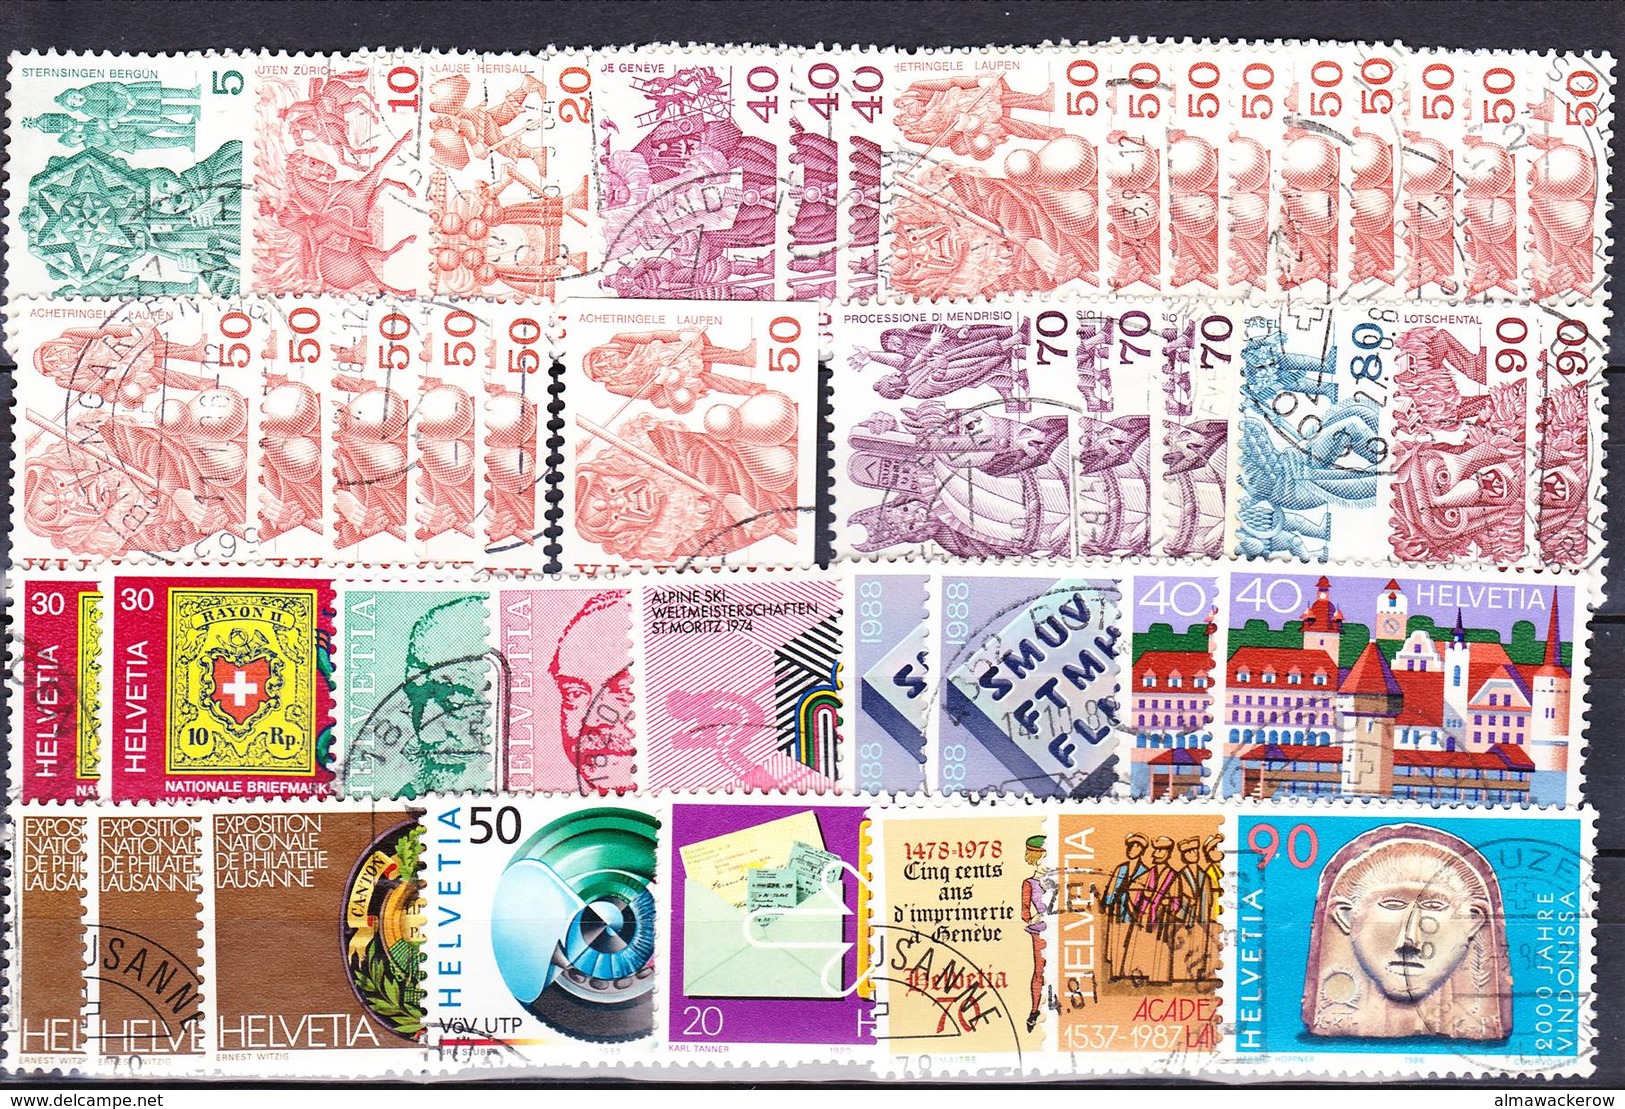 2018-0271 Switzerland big lot of used o stamps, see all detailed scans!